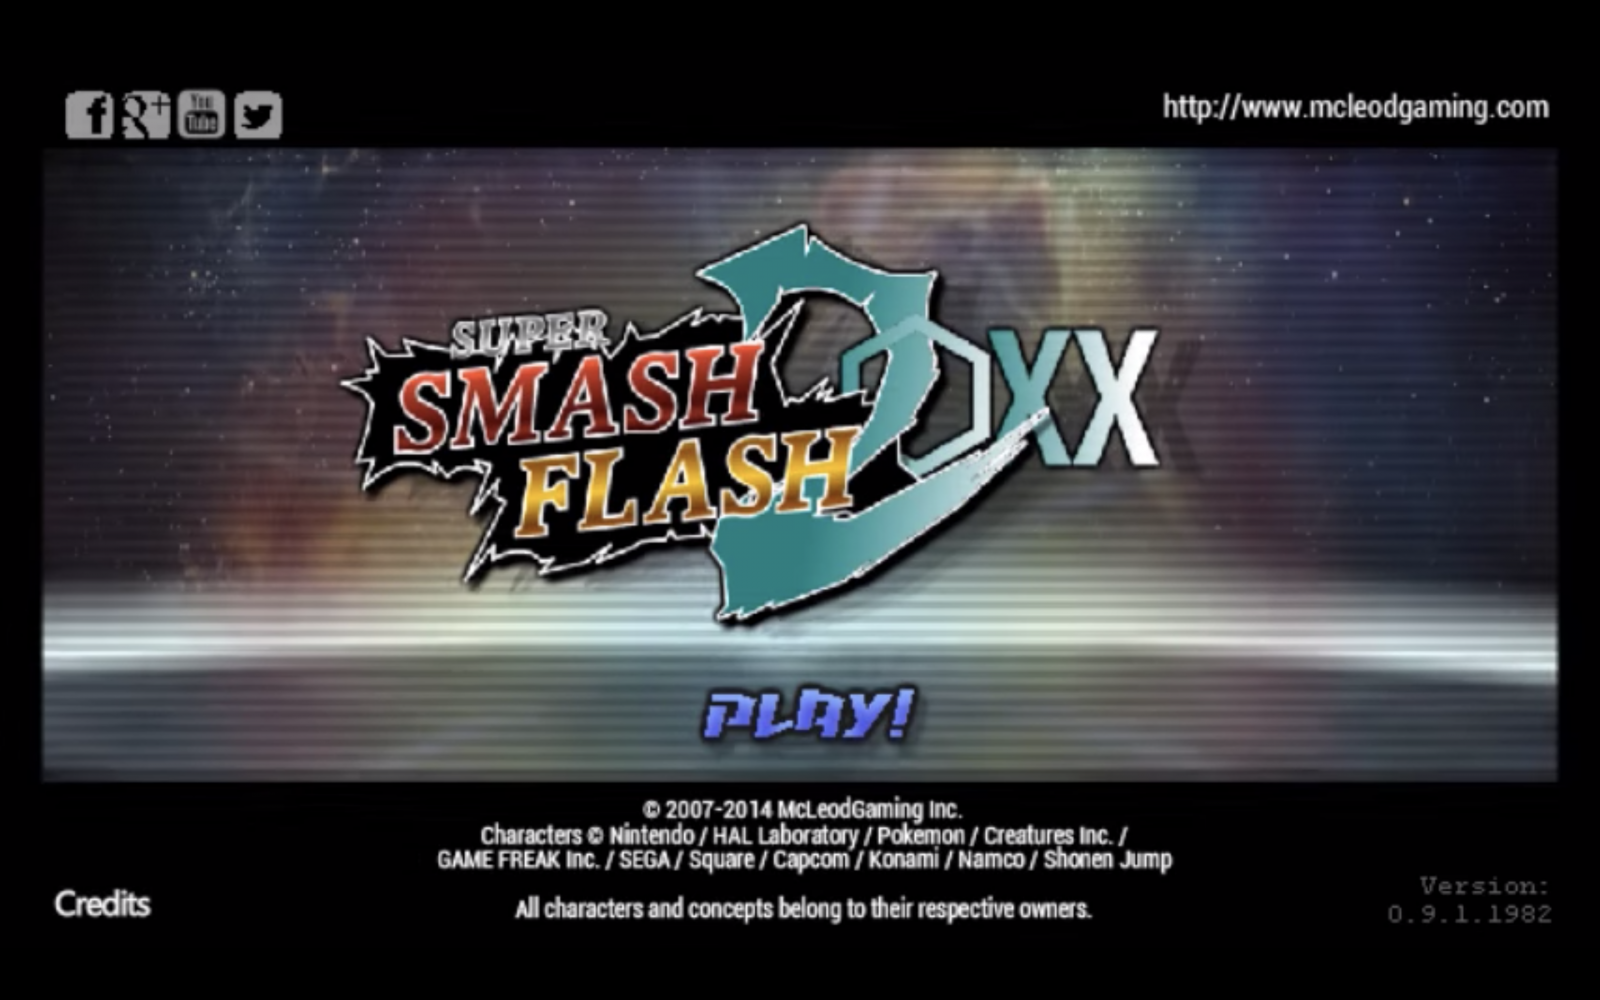 How to Play Super Smash Flash 2 